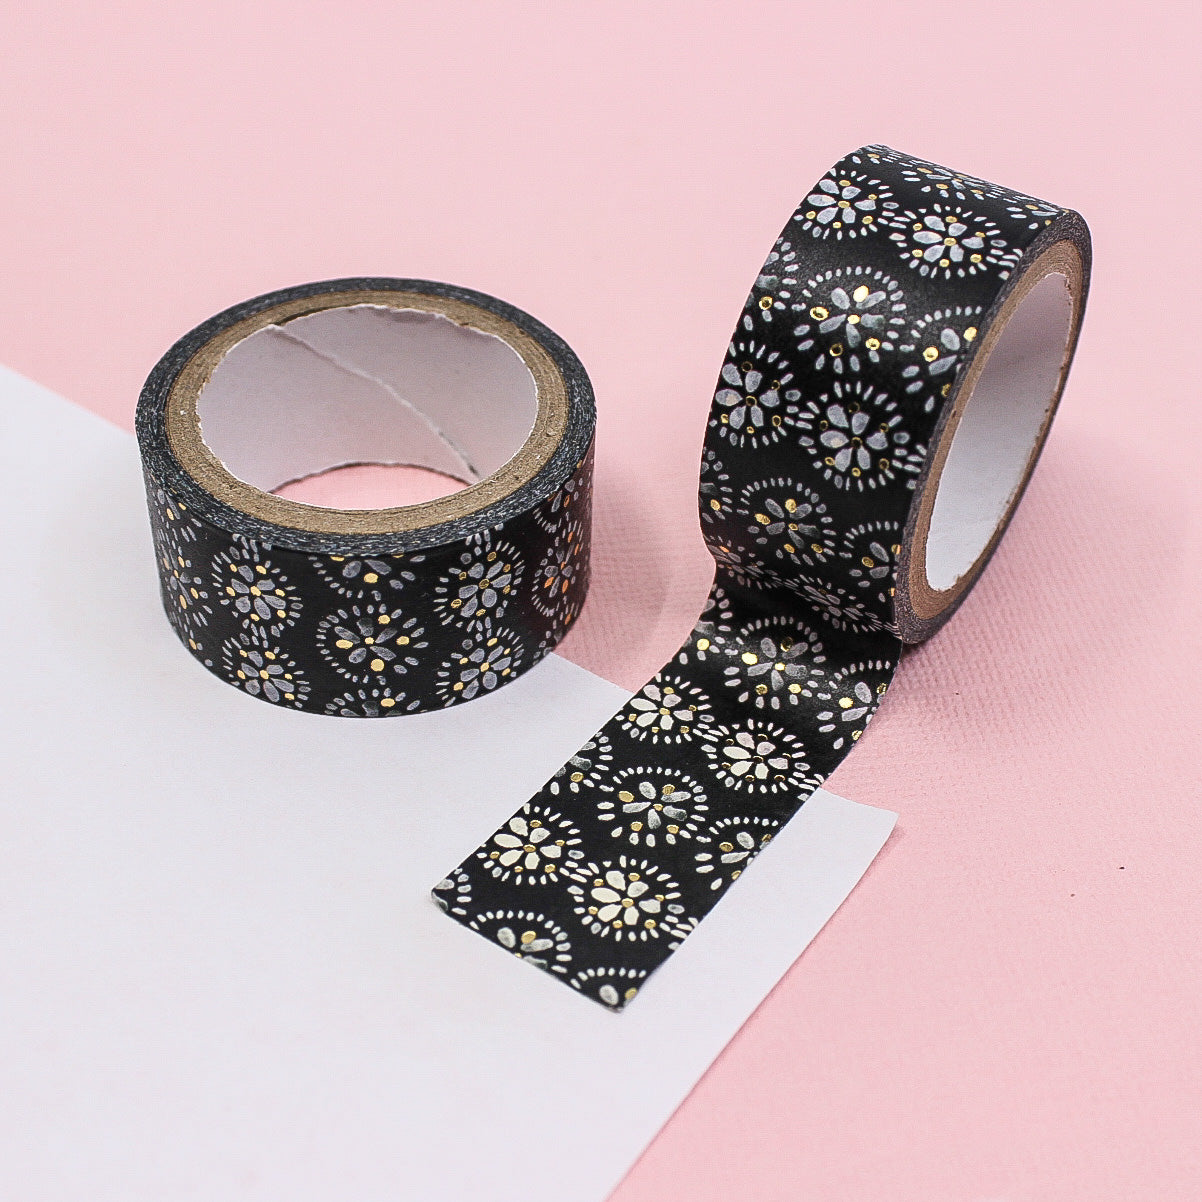 The intricate geometric flower pattern in gold foil adds a touch of sophistication and elegance to any project. Perfect for scrapbooking, card making, or adding a decorative touch to gifts and journals. This tape is sold at BBB Supplies Craft Shop.